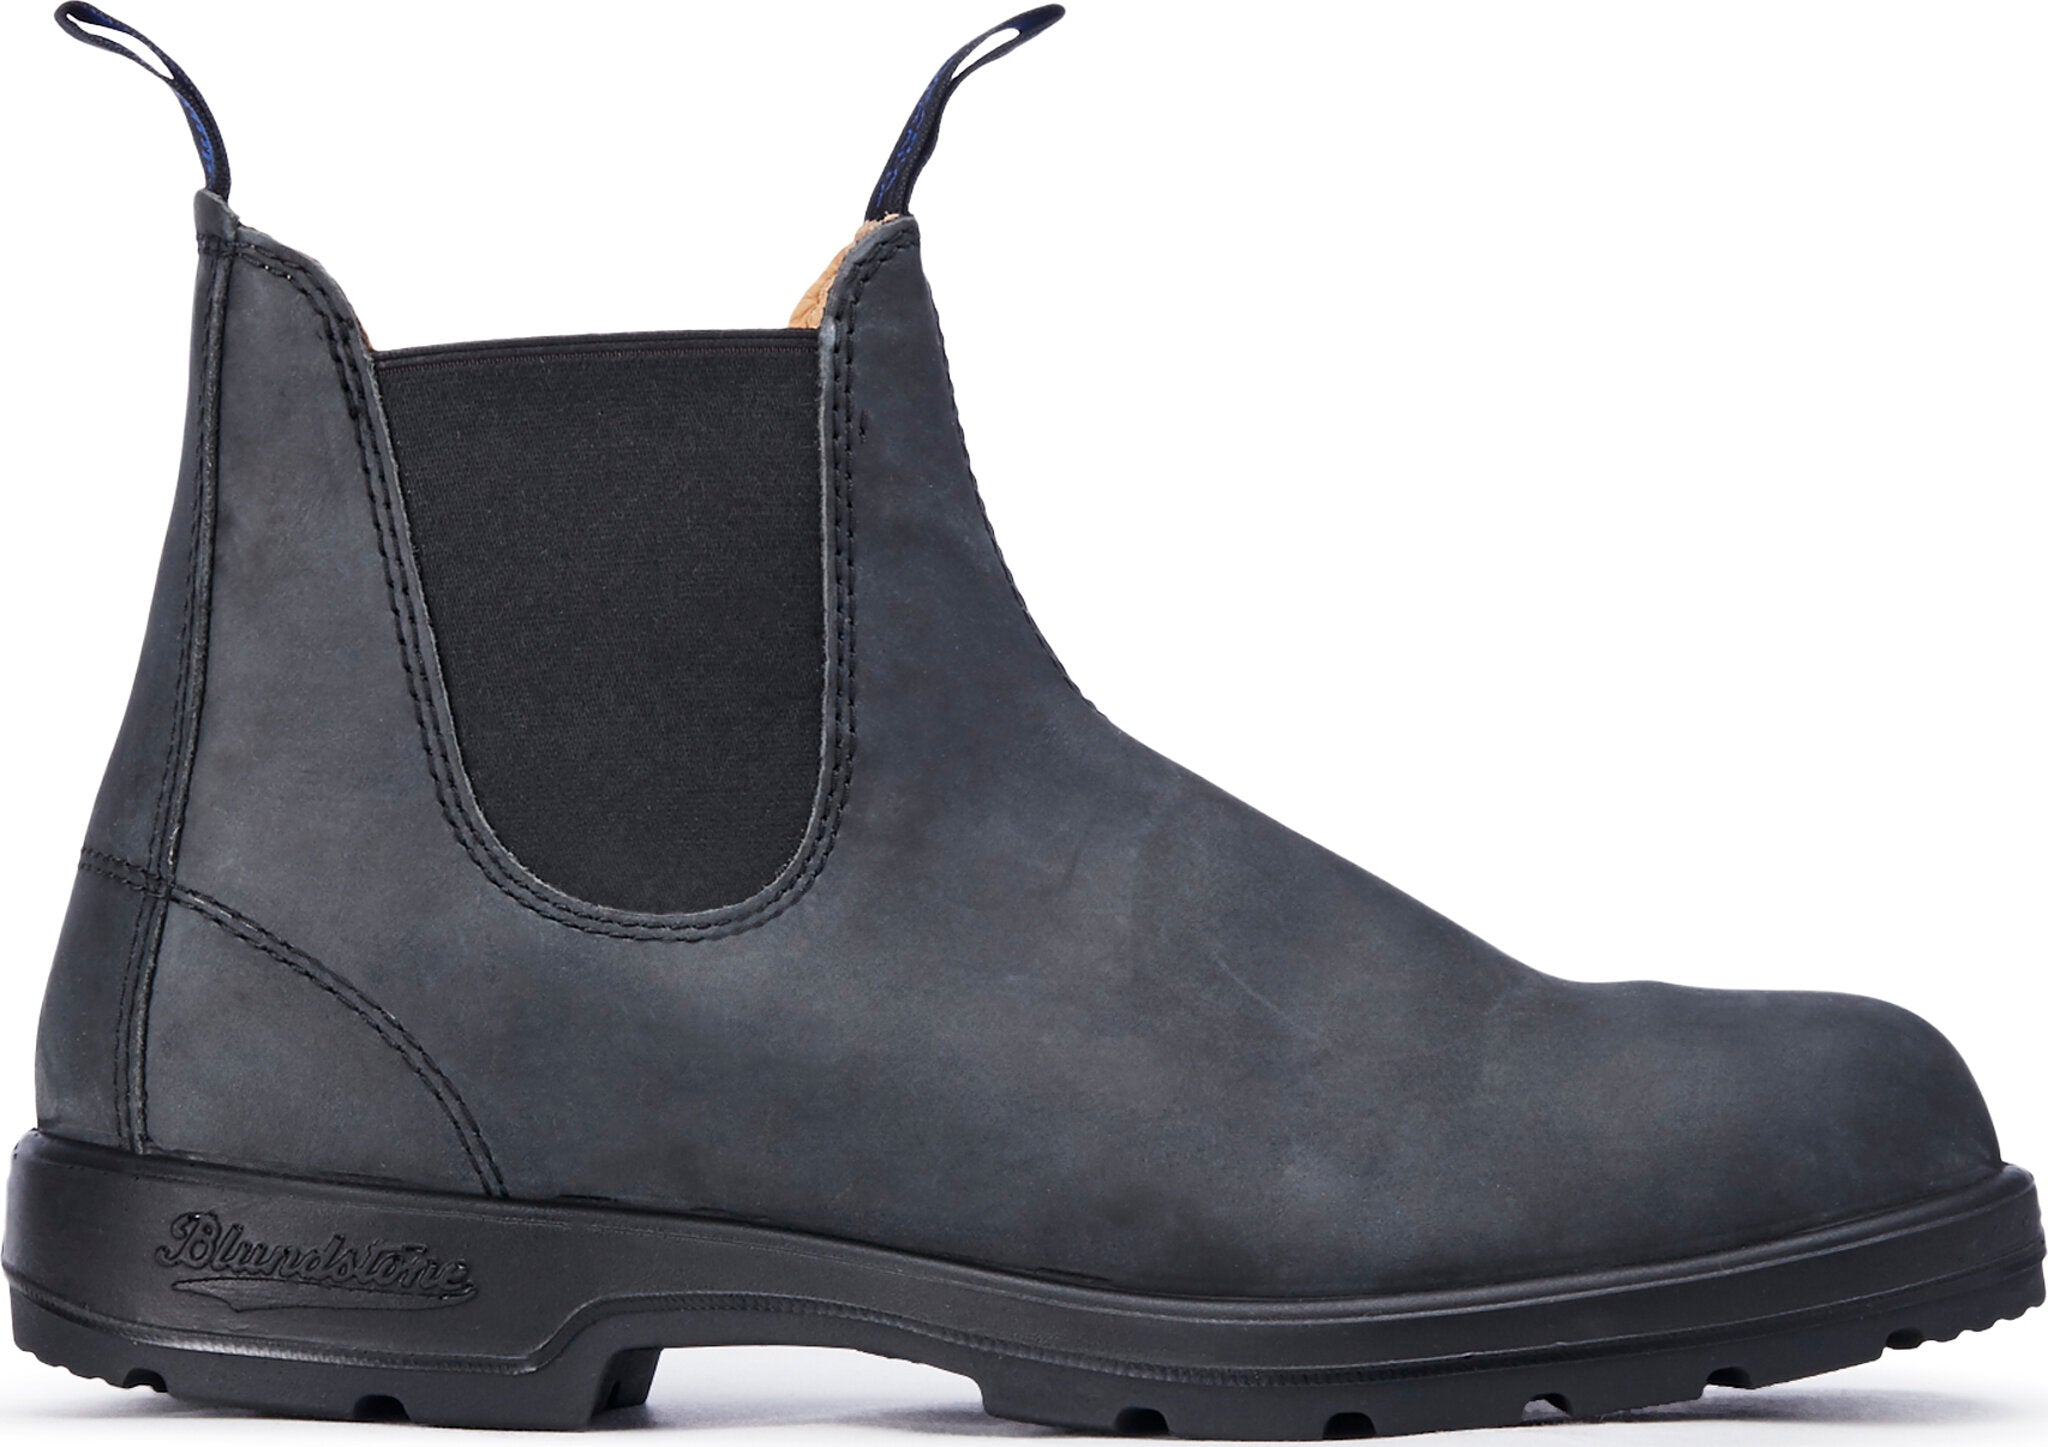 Blundstone 1478 - Winter Thermal Classic Rustic Black Boots